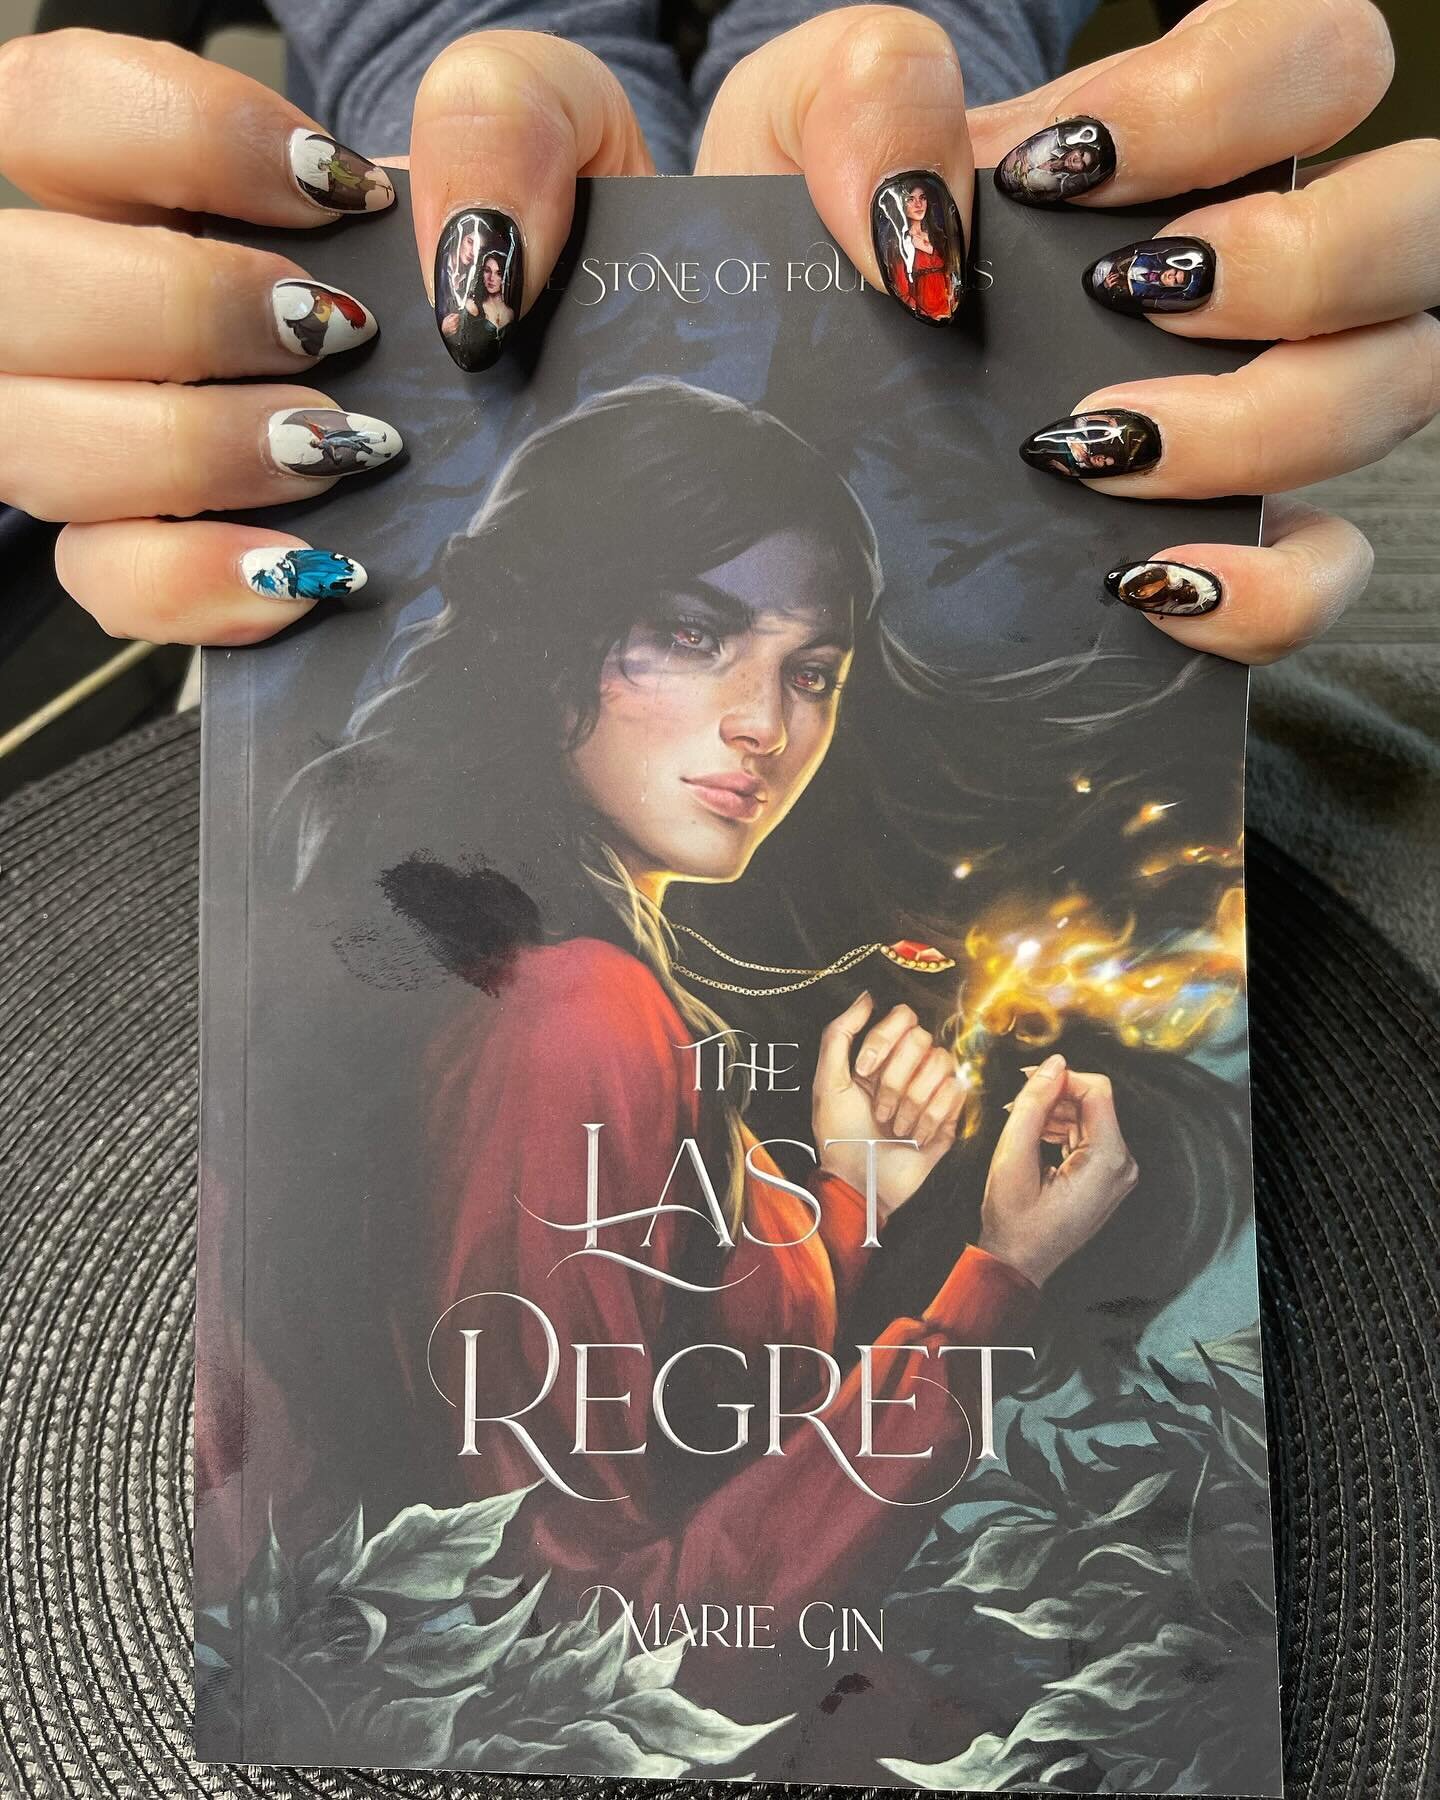 When you love their art so much, you get nails done with it 💅🏻 @jengrayart @sashac_art made my characters come alive ❤️ #thelastregret #thelastremorse #thestoneoffourfires #darkfantasy #booktok #bookstagram